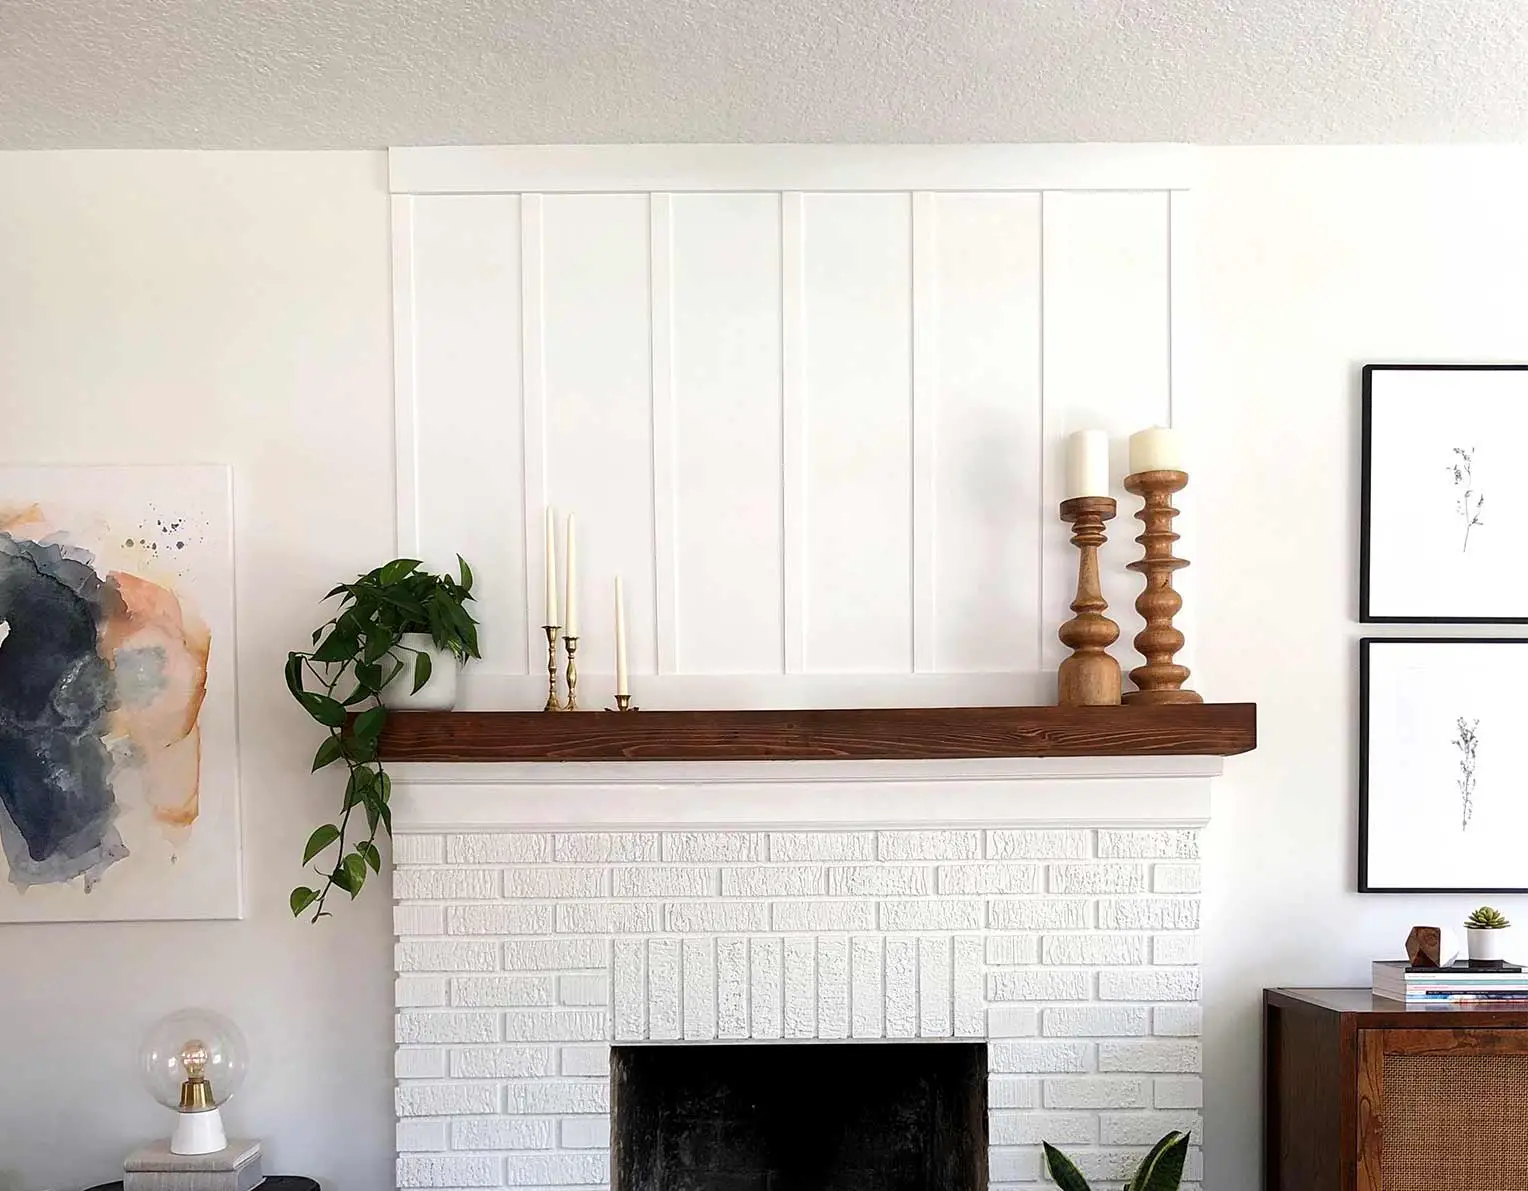 DIY Board and Batten Tutorial: Creating a Focal Point Above the Fireplace